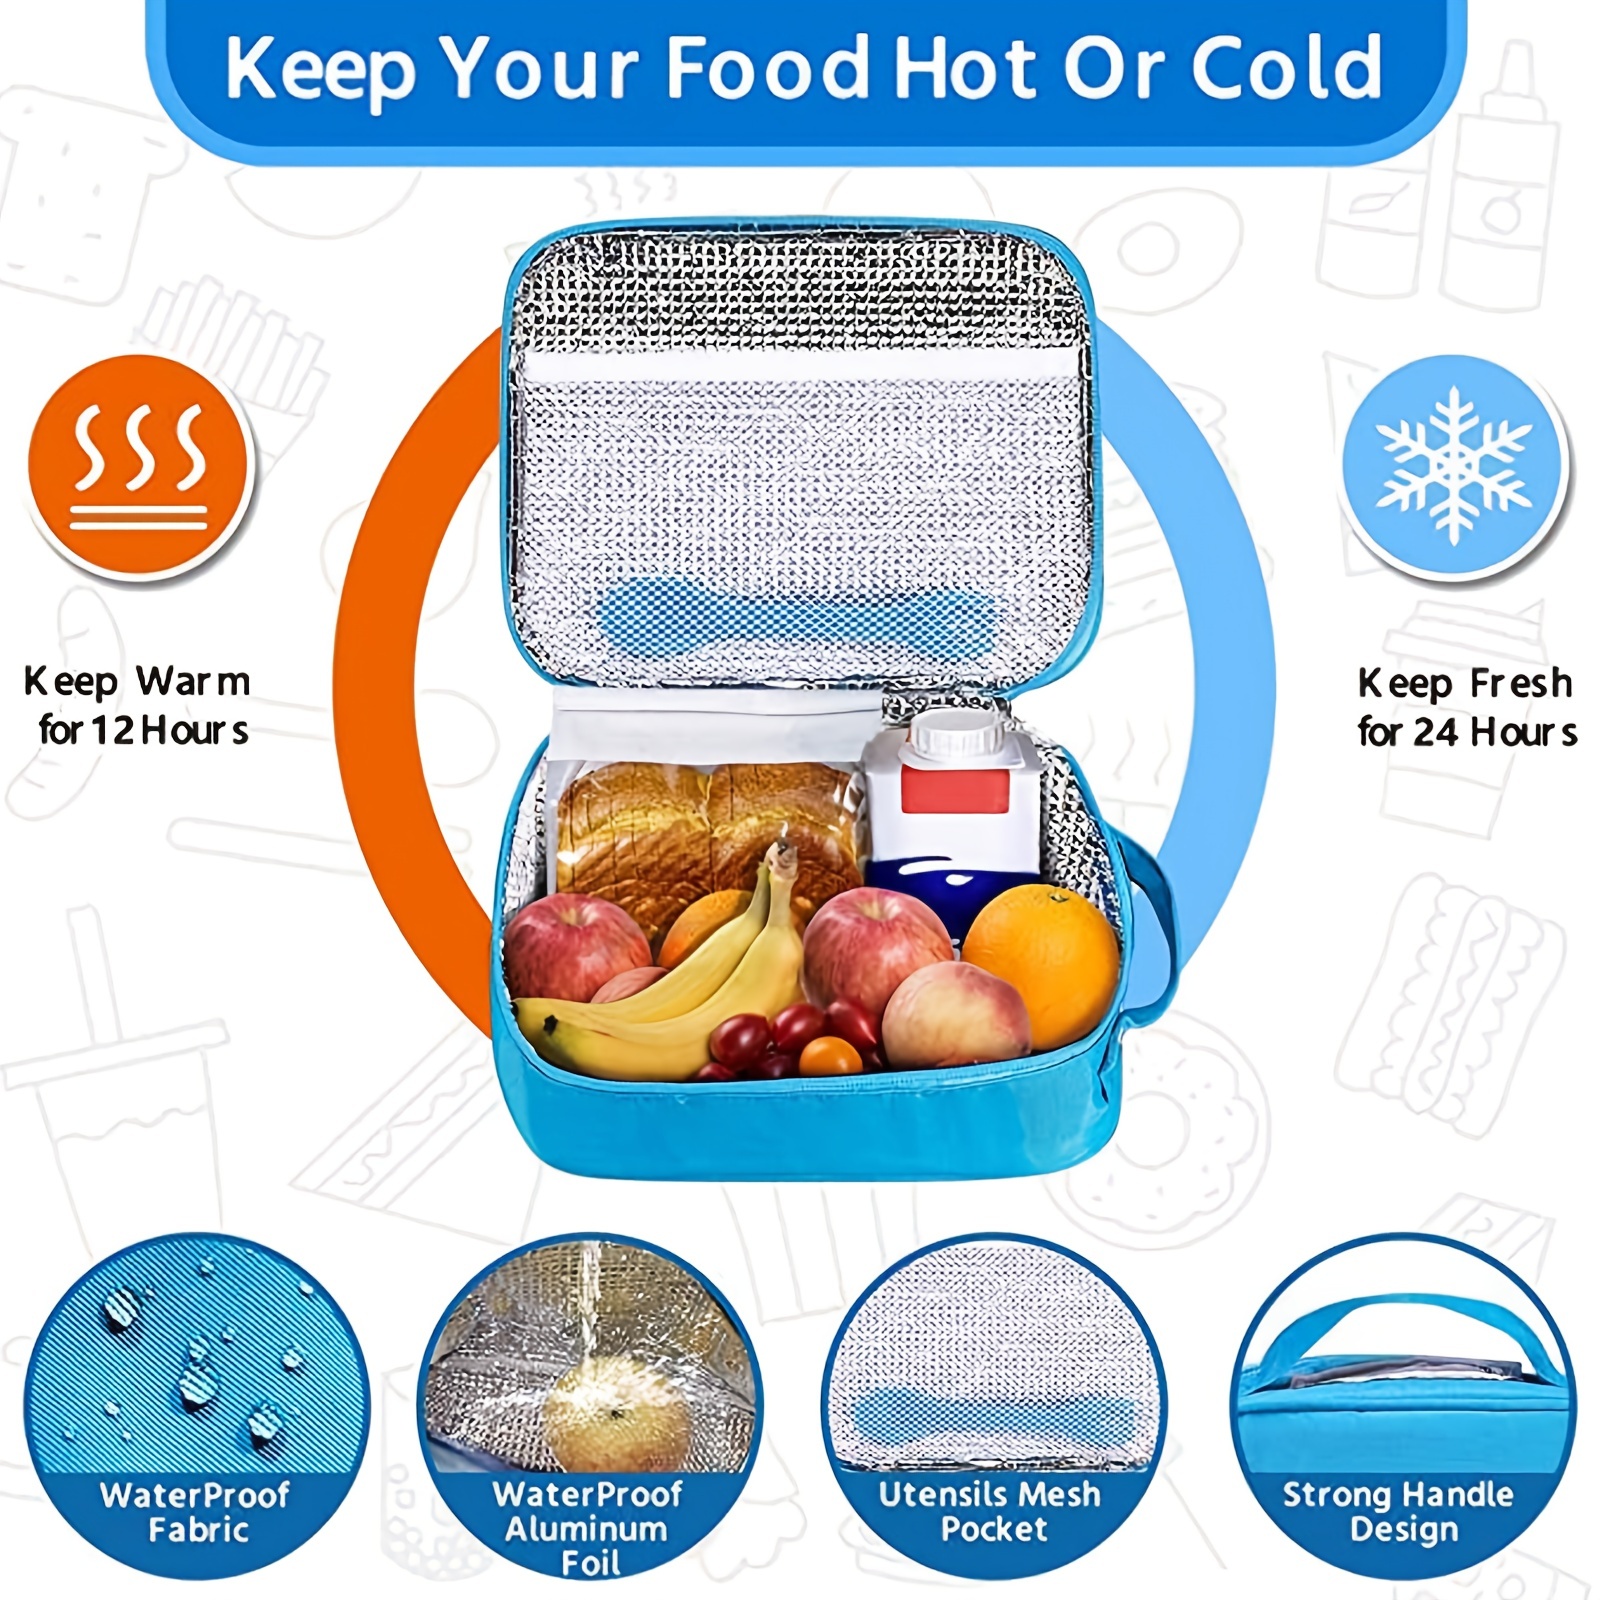 JXXM Bento Lunch Box for Kids With 8oz Soup thermo,Leak-proof